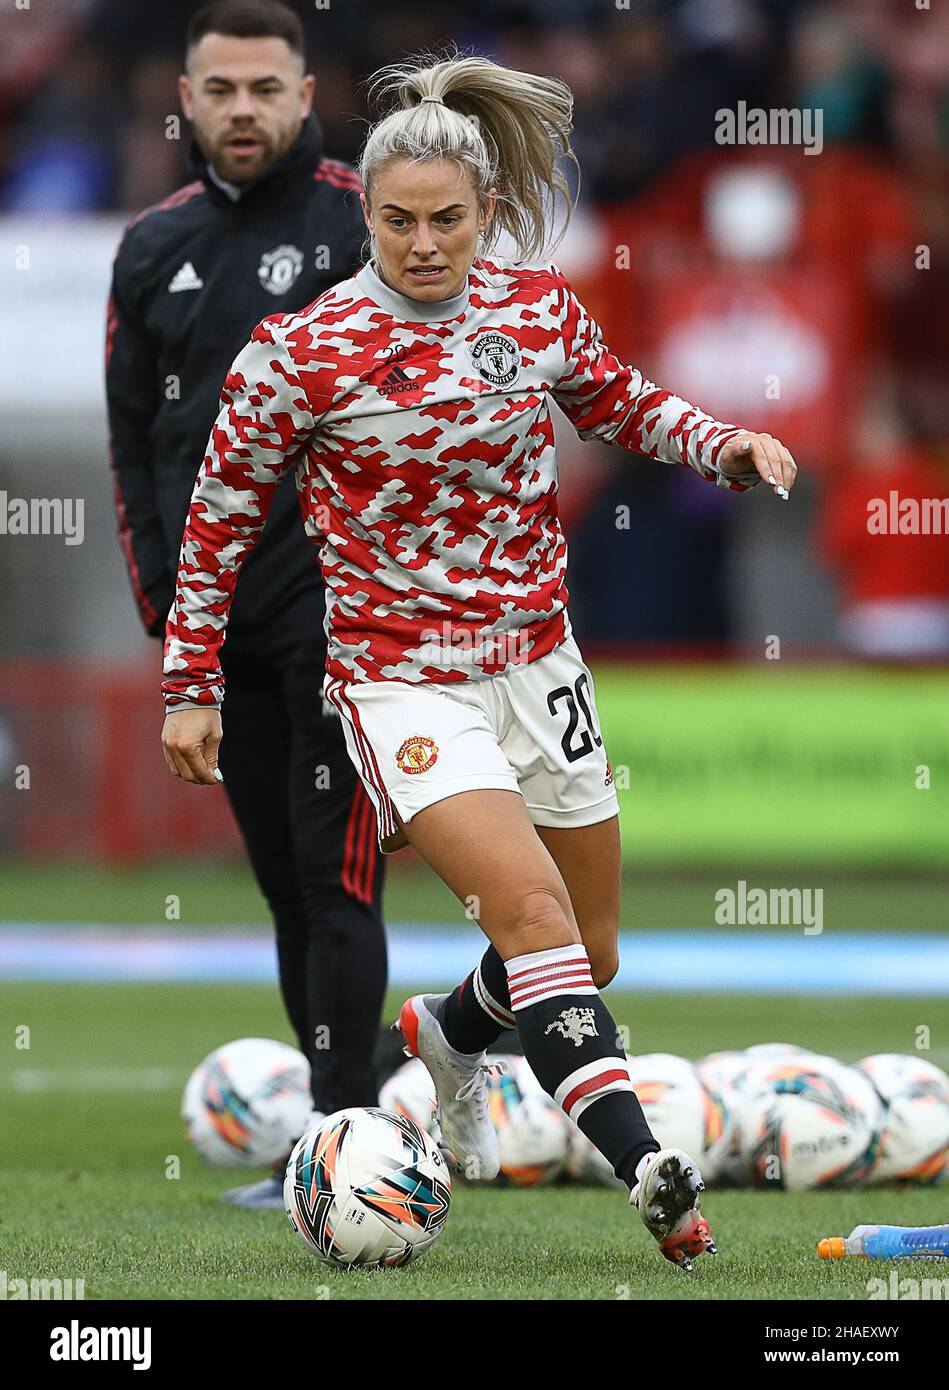 Crawley, UK, 12th December 2021. Kirsty Smith of Manchester United during the The FA Women's Super League match at The People's Pension Stadium, Crawley. Picture credit should read: Paul Terry / Sportimage Credit: Sportimage/Alamy Live News Stock Photo